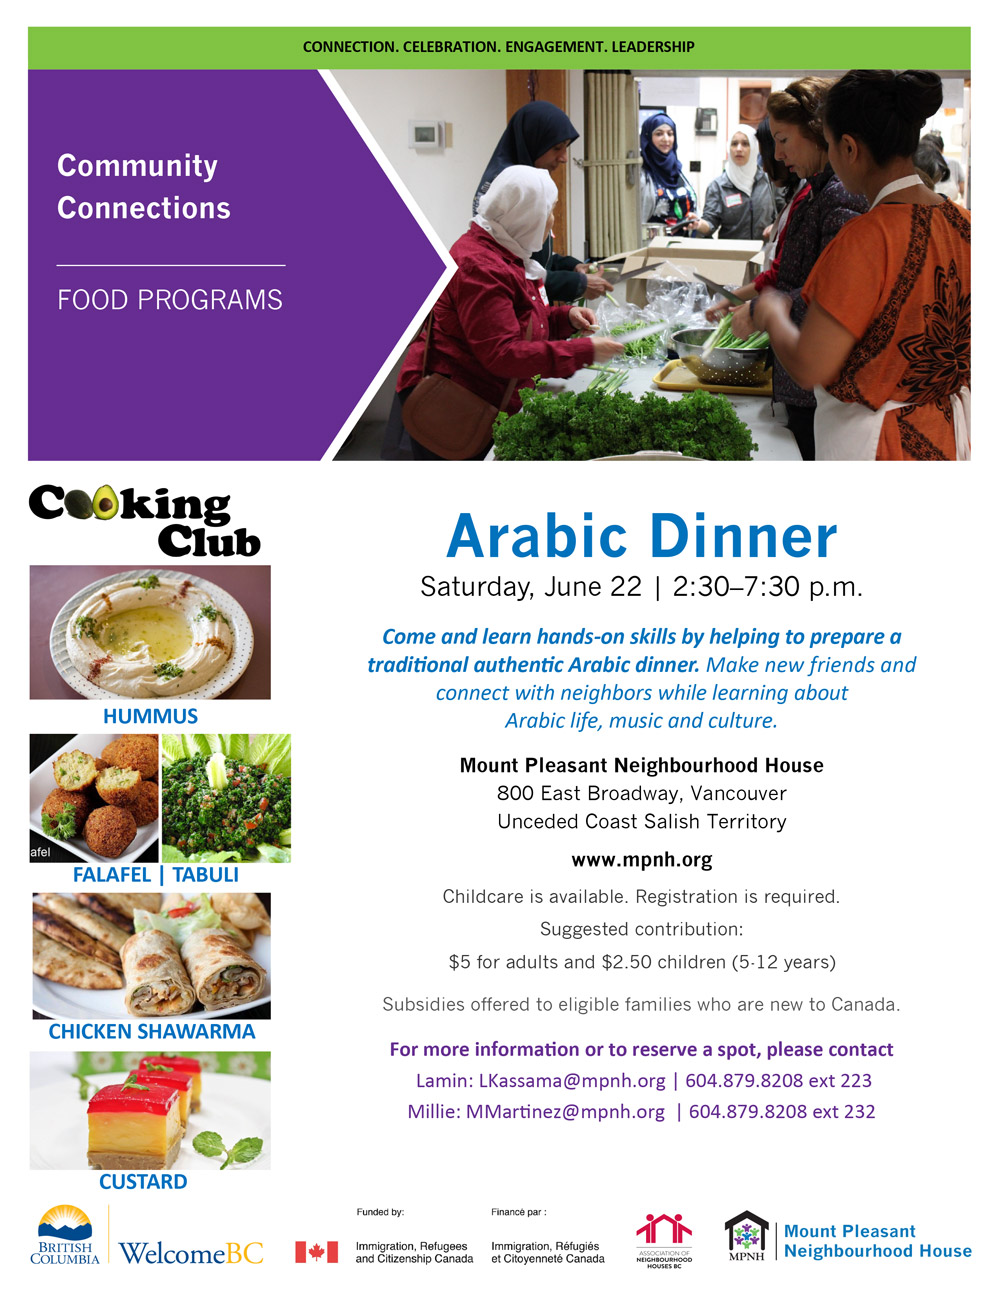 An image of the poster with event details, featuring a picture of people chopping vegetables together in the kitchen.